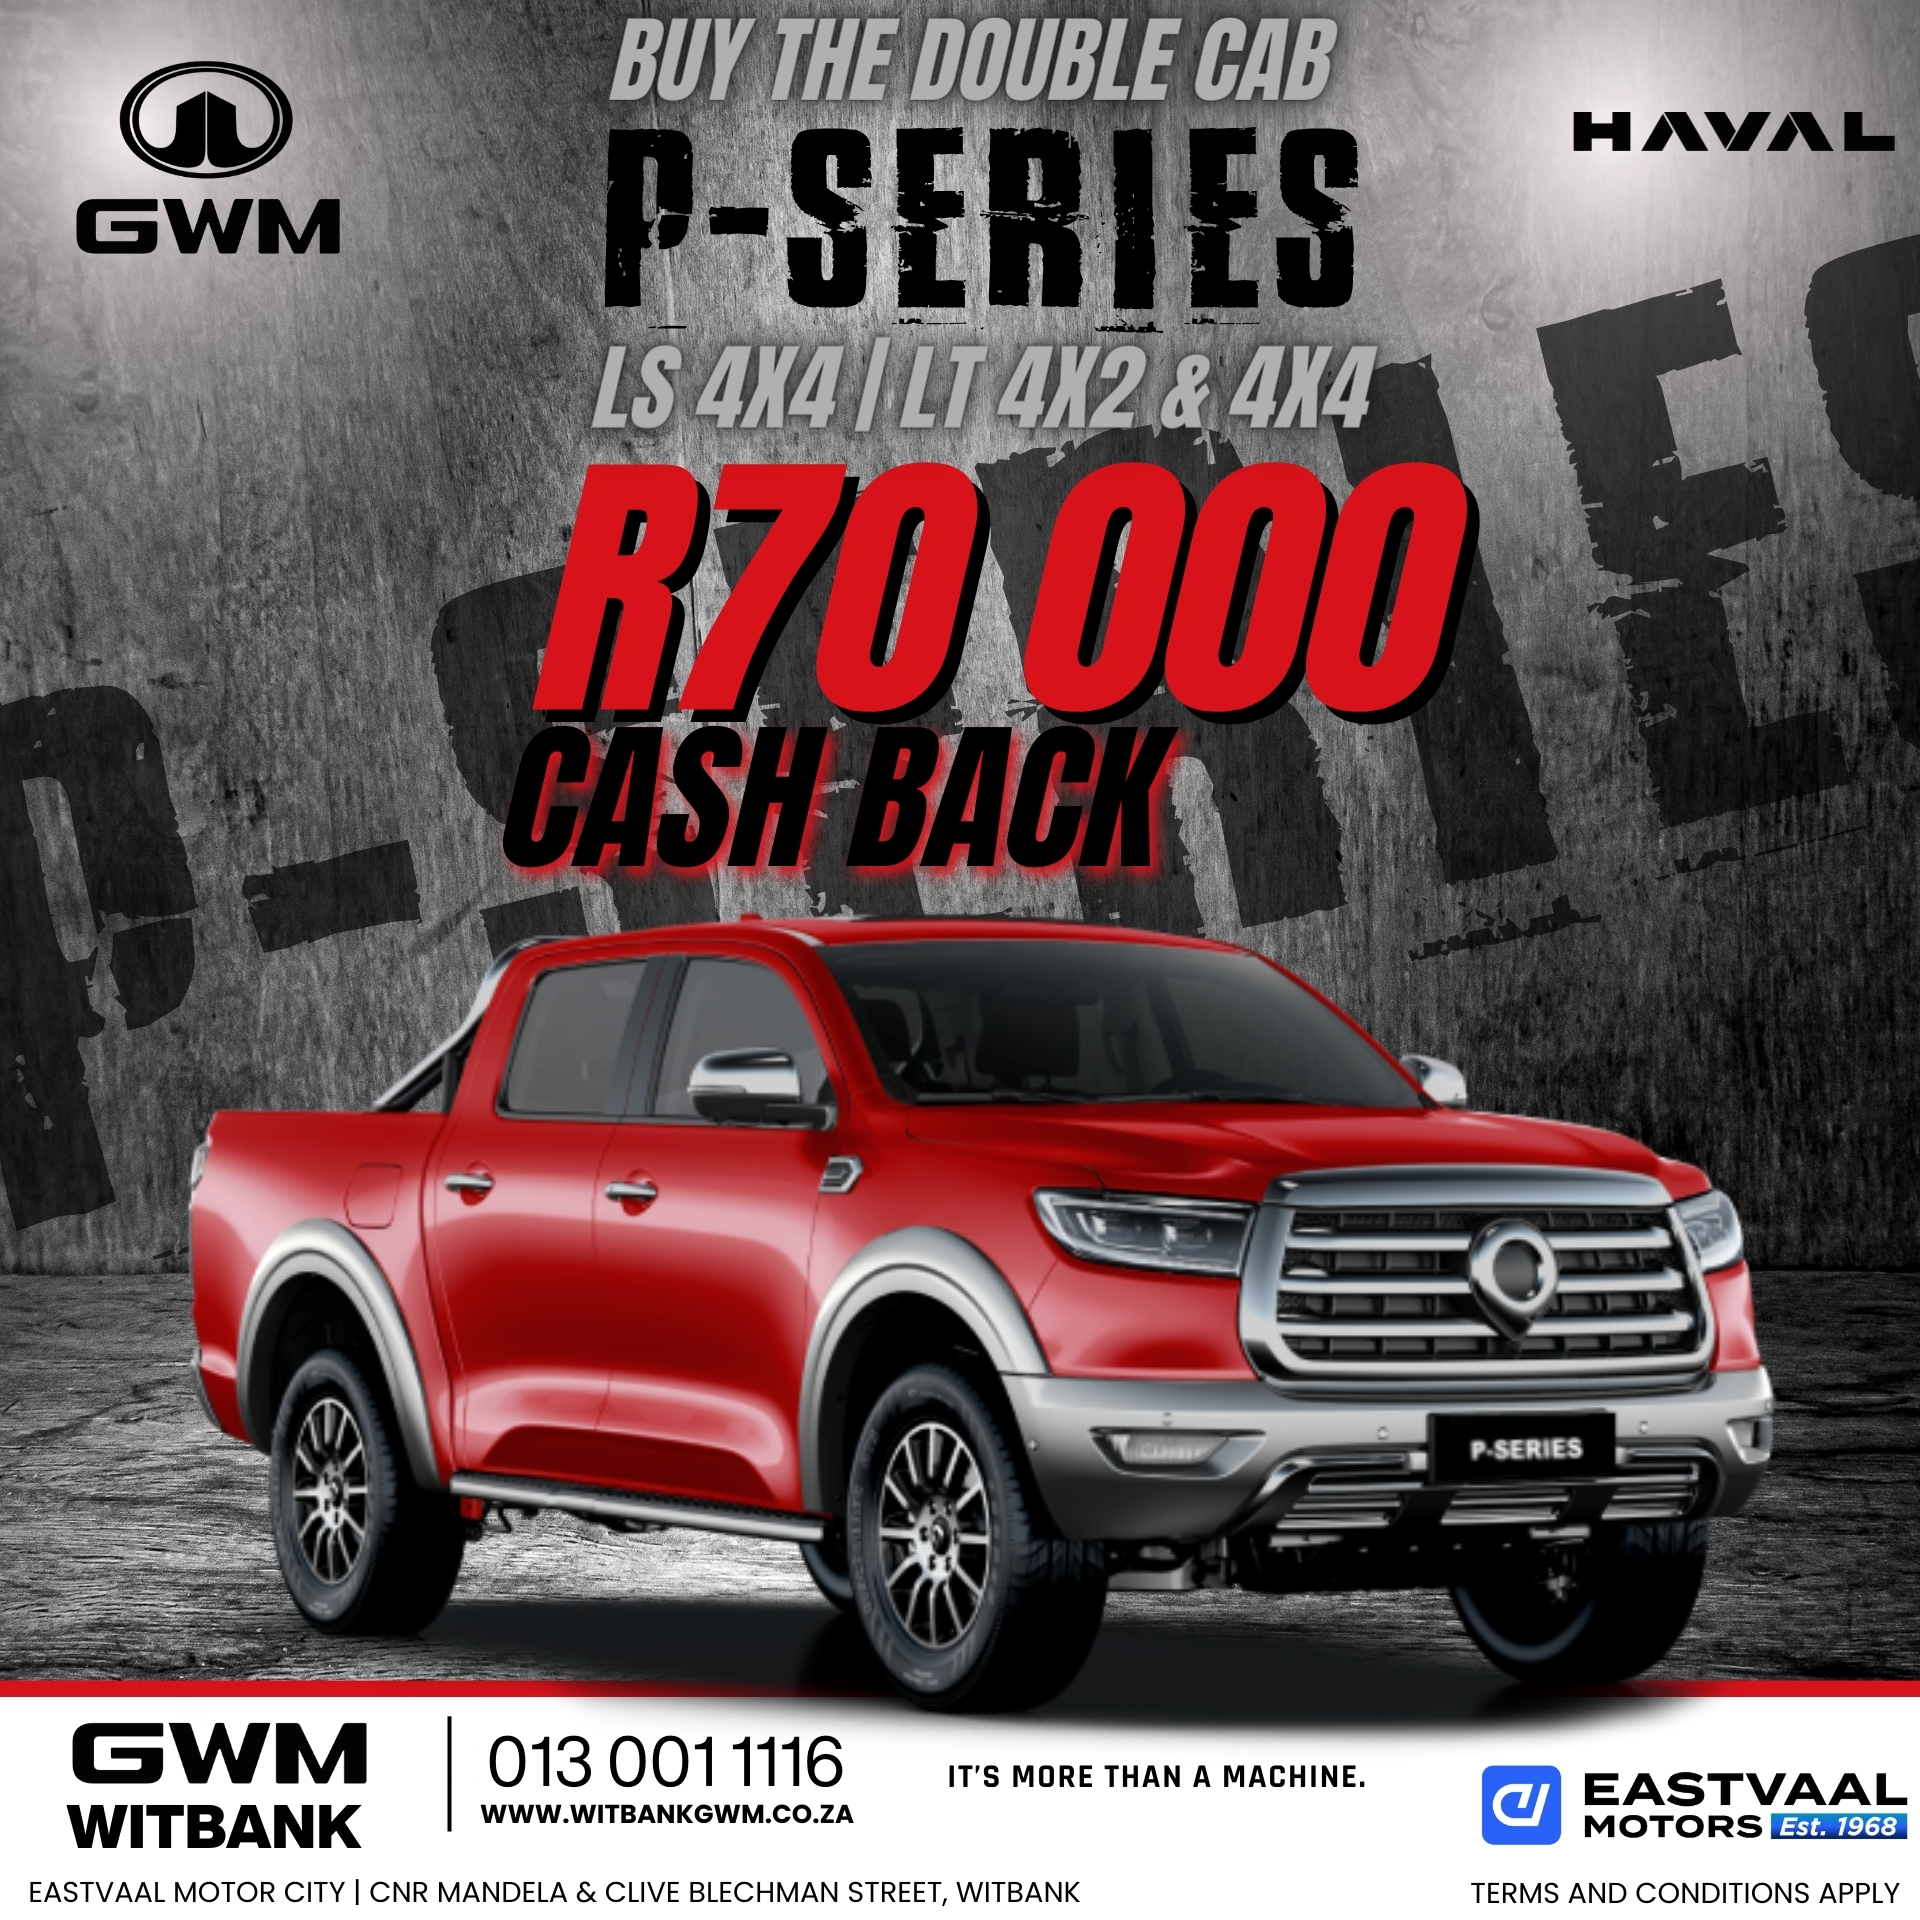 This July, explore new horizons in style with Haval GWM. Visit us for exclusive deals! image from Eastvaal Motors